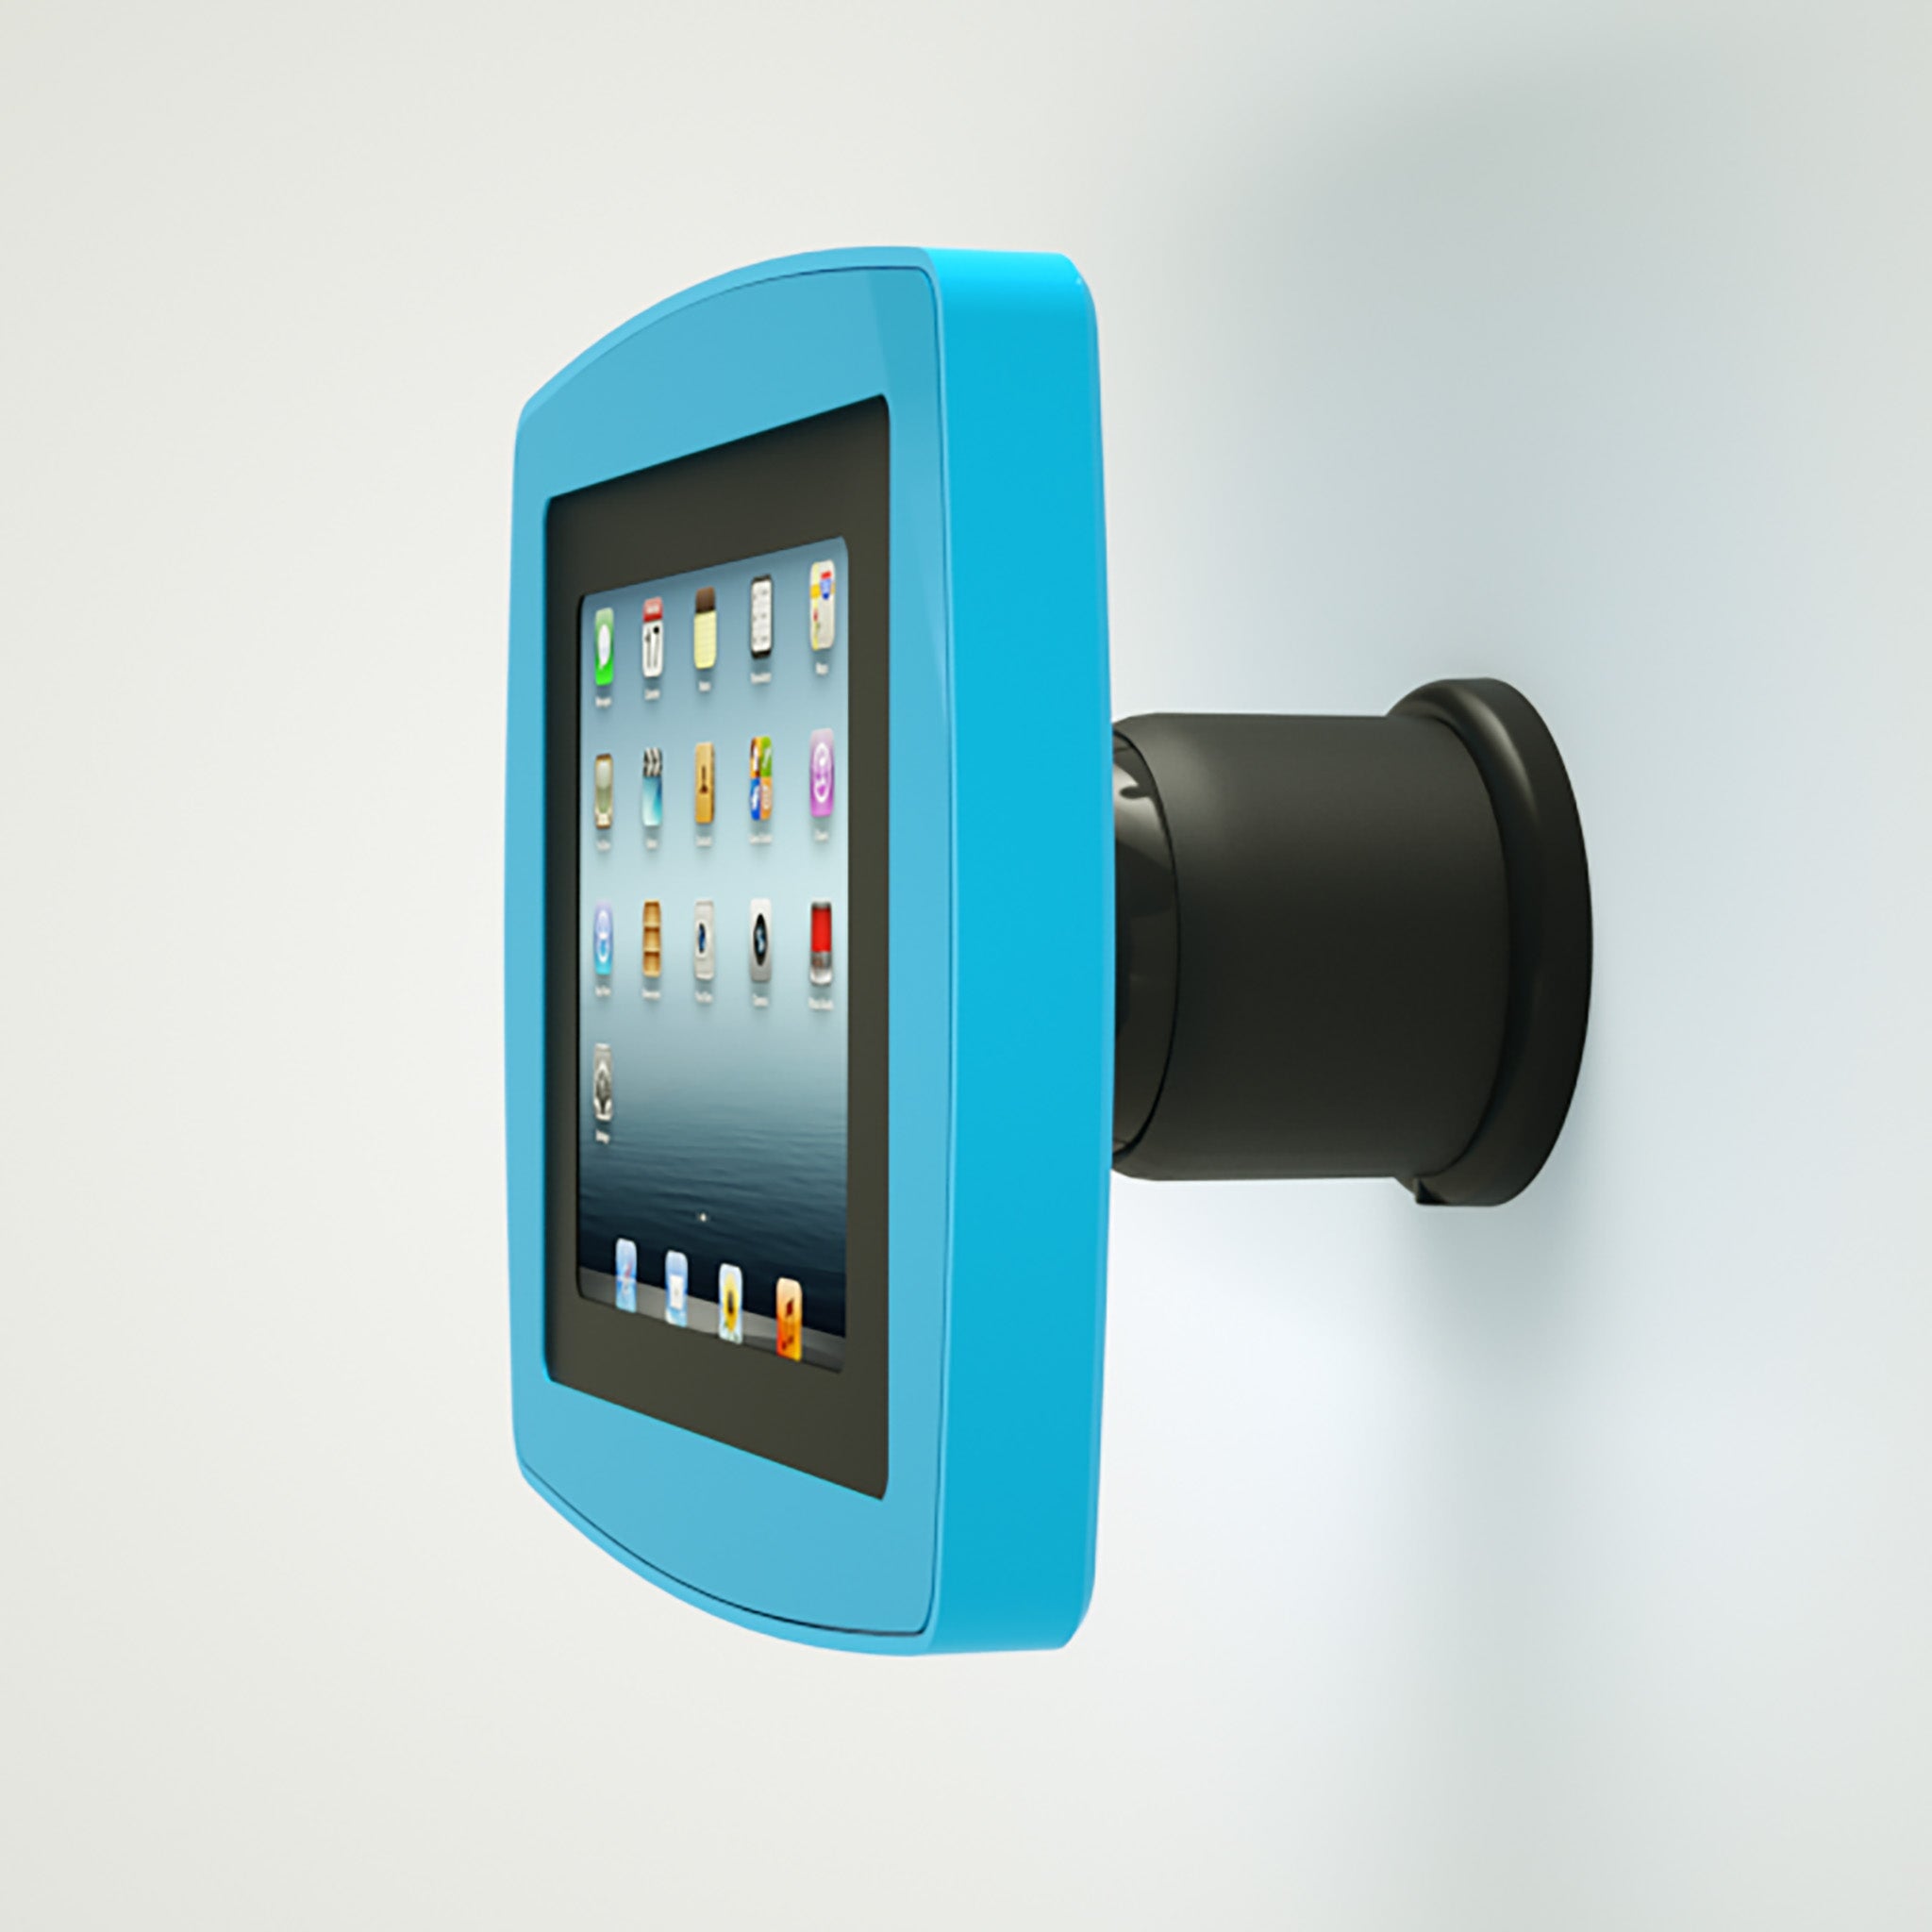 Armodilo Tilt Wall Mounted iPad & Tablet Enclosure in blue